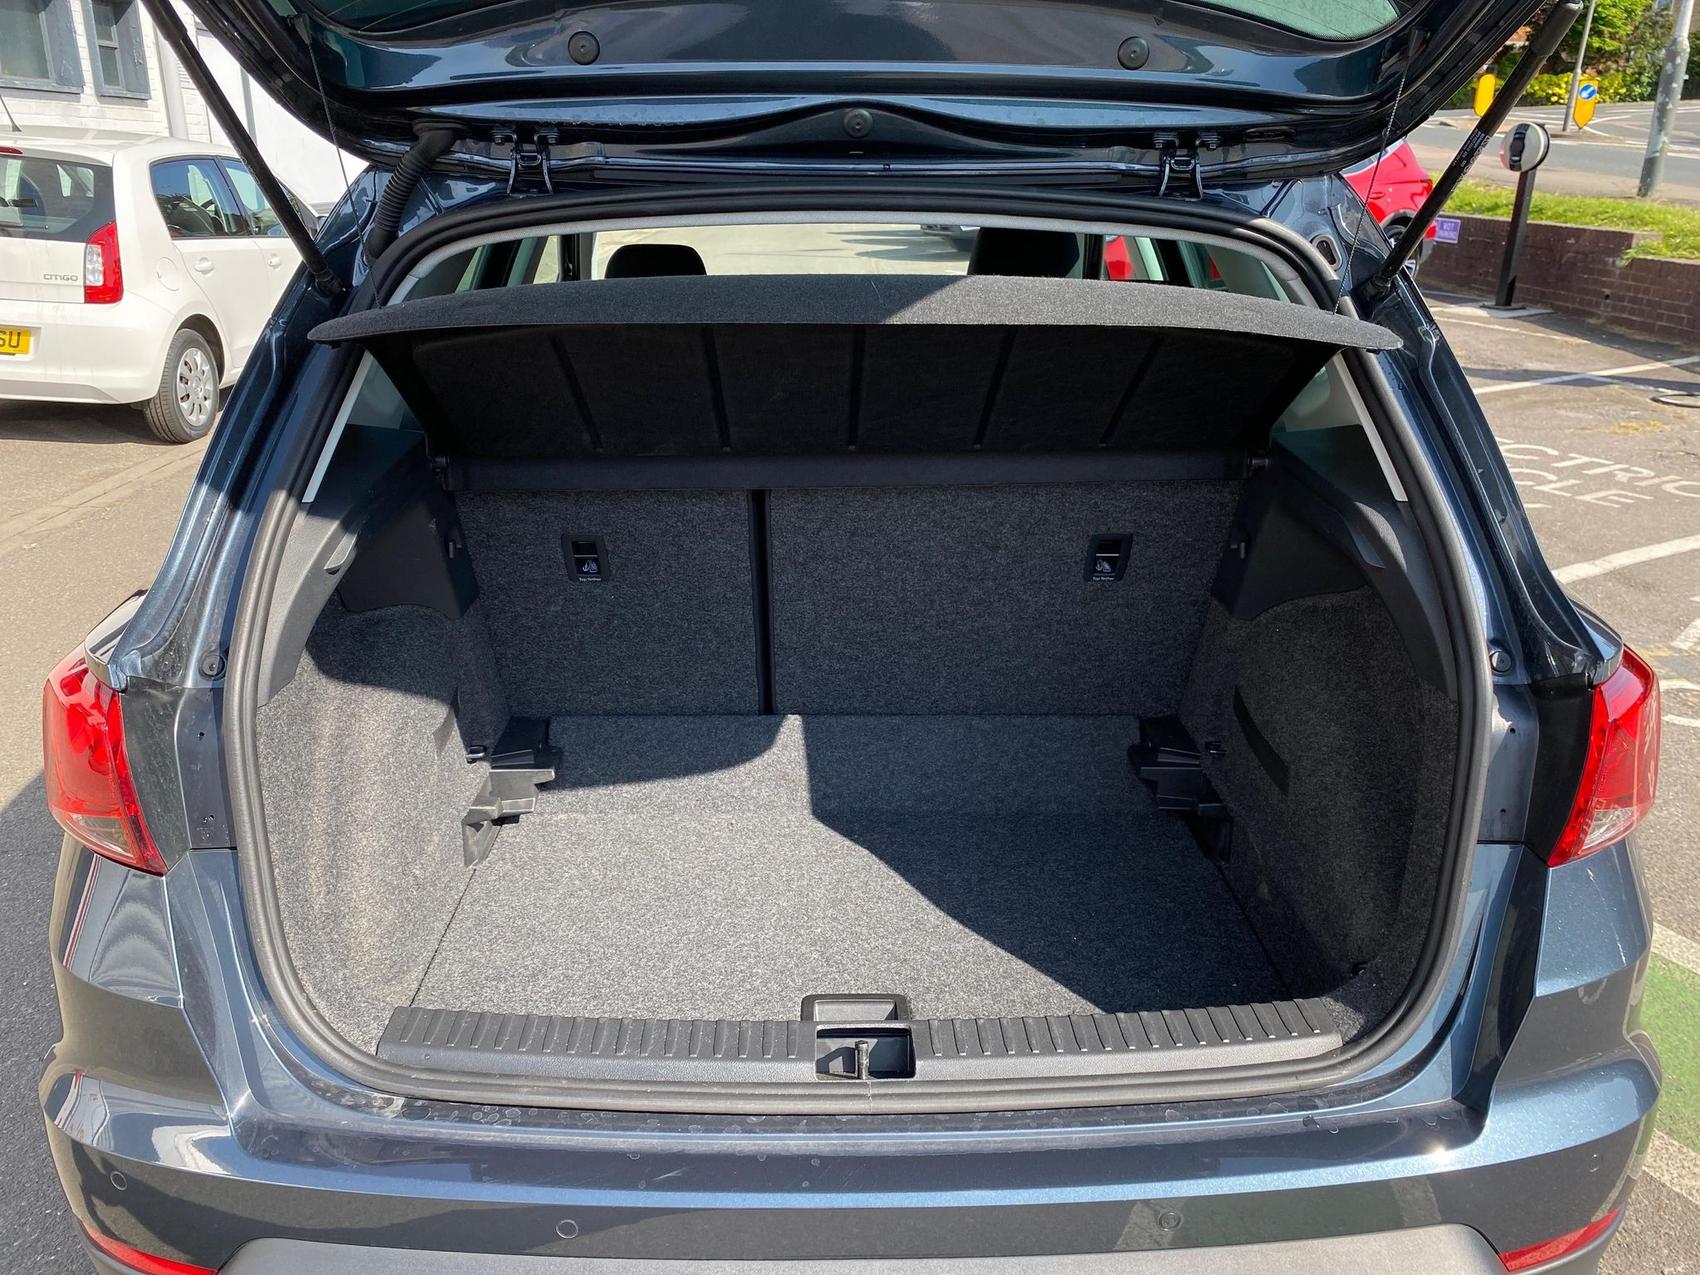 Seat Arona dimensions, boot space and similars